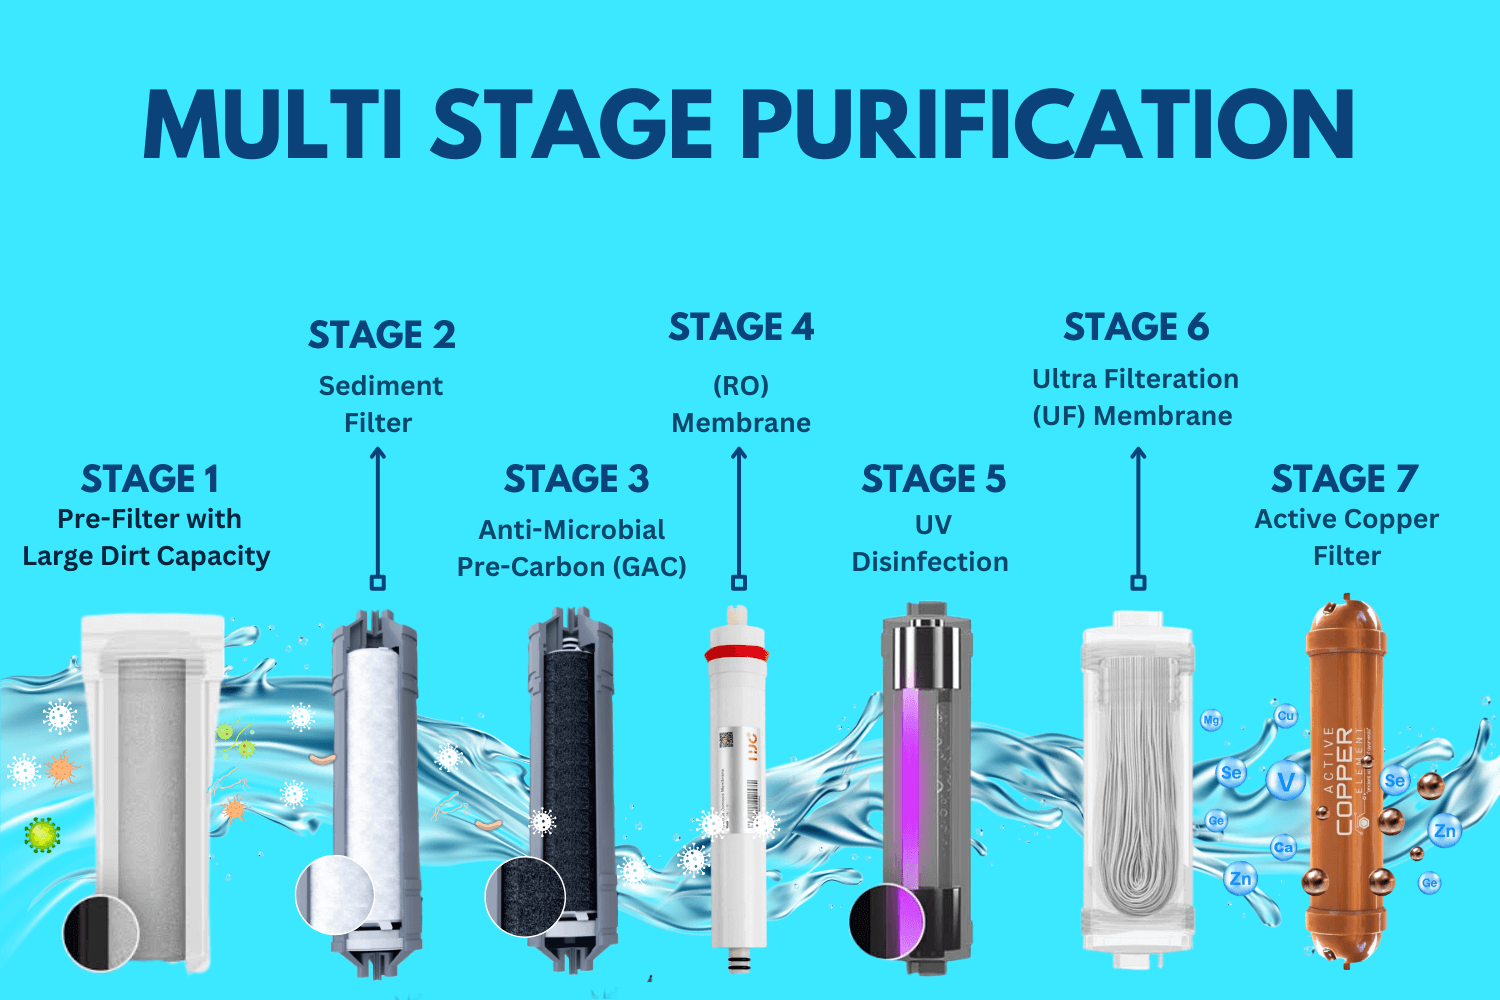 7 Stage Water Purification Process by Aqua RO Water Purifier